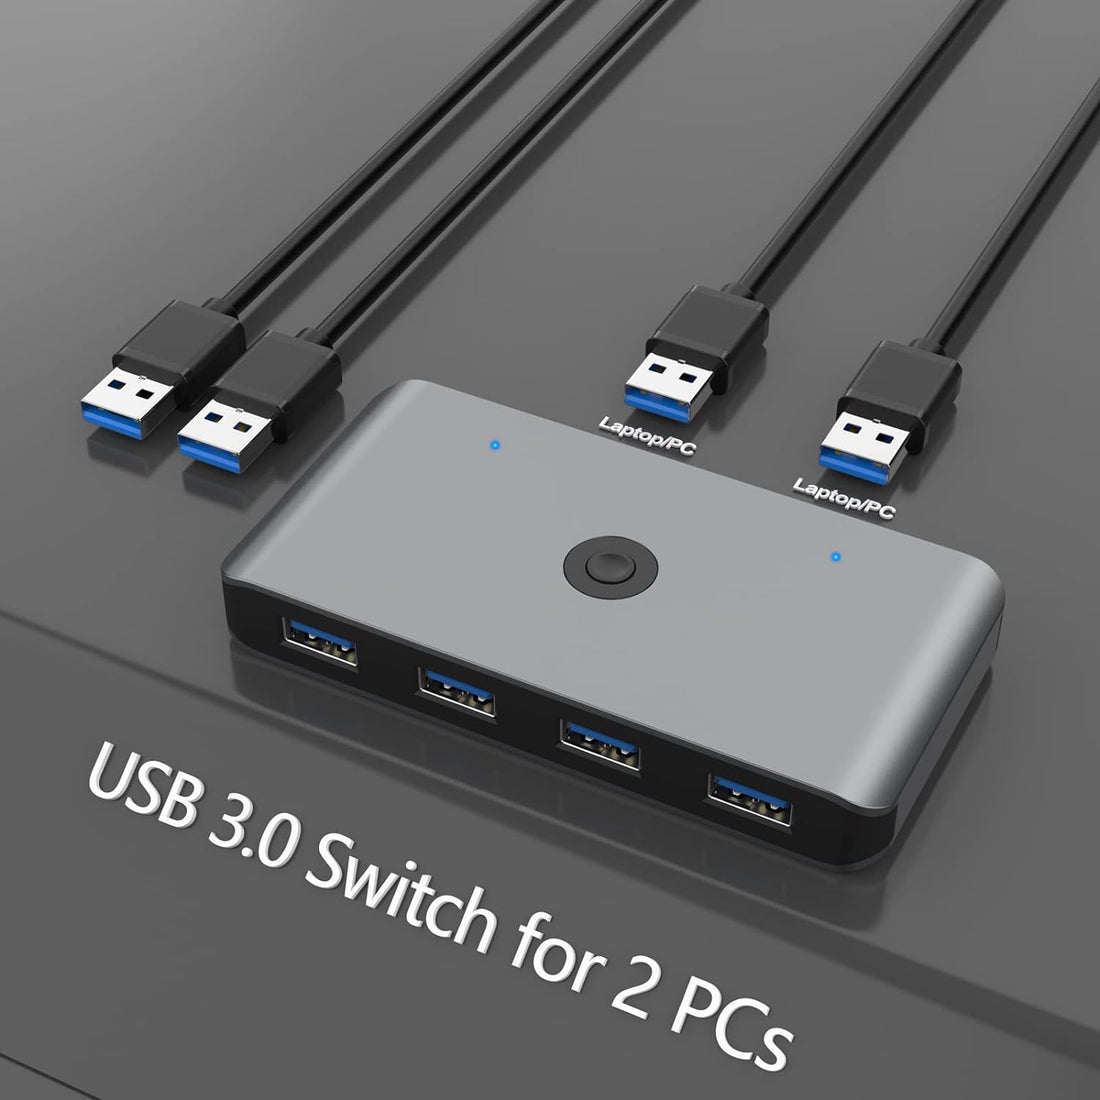 USB 3.0 Switch Selector, KVM Switch Adapter 2 Computers Sharing 4 USB Devices, USB Peripheral Switcher Box Hub for PC Printer Scanner Mouse Keyboard with One Button Swapping and 2 Pack USB Cable